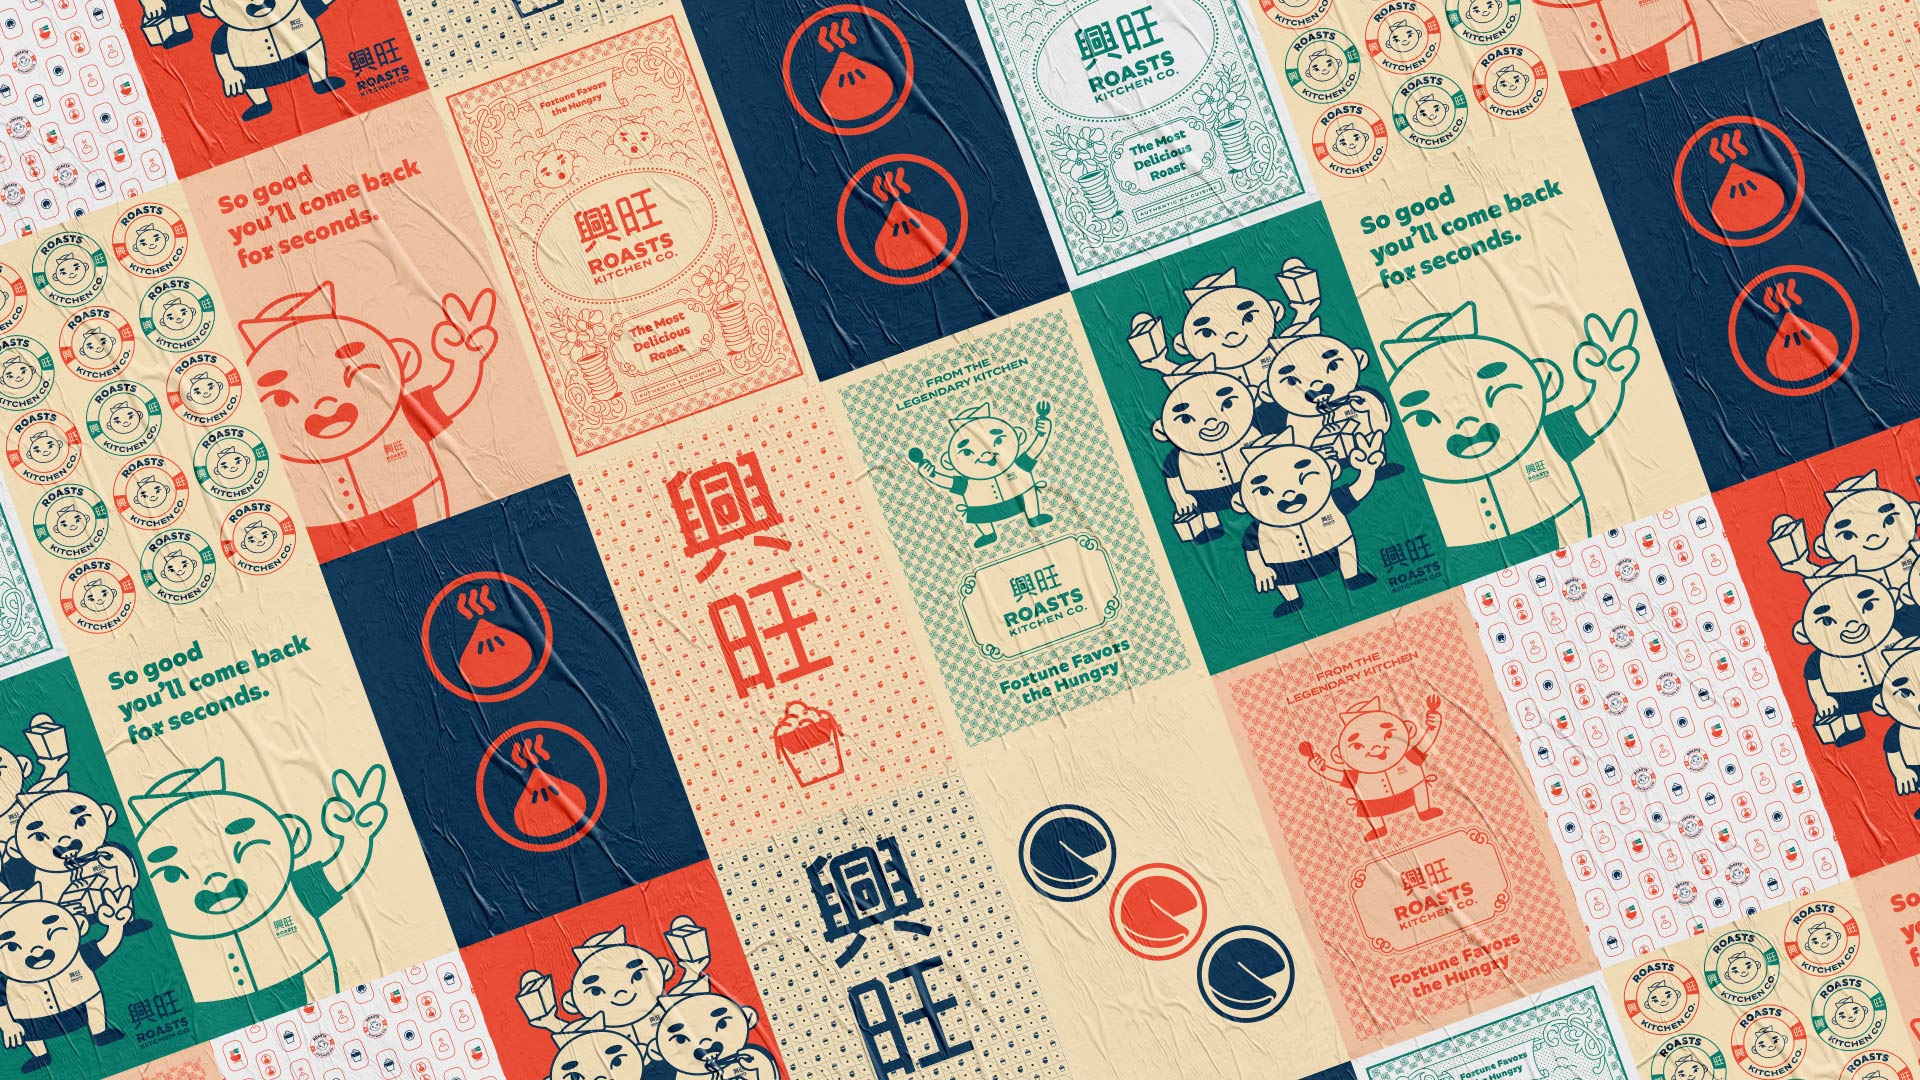 Intricate and oriental poster wall designs for Hong Kong roasts restaurant Roasts Kitchen Company